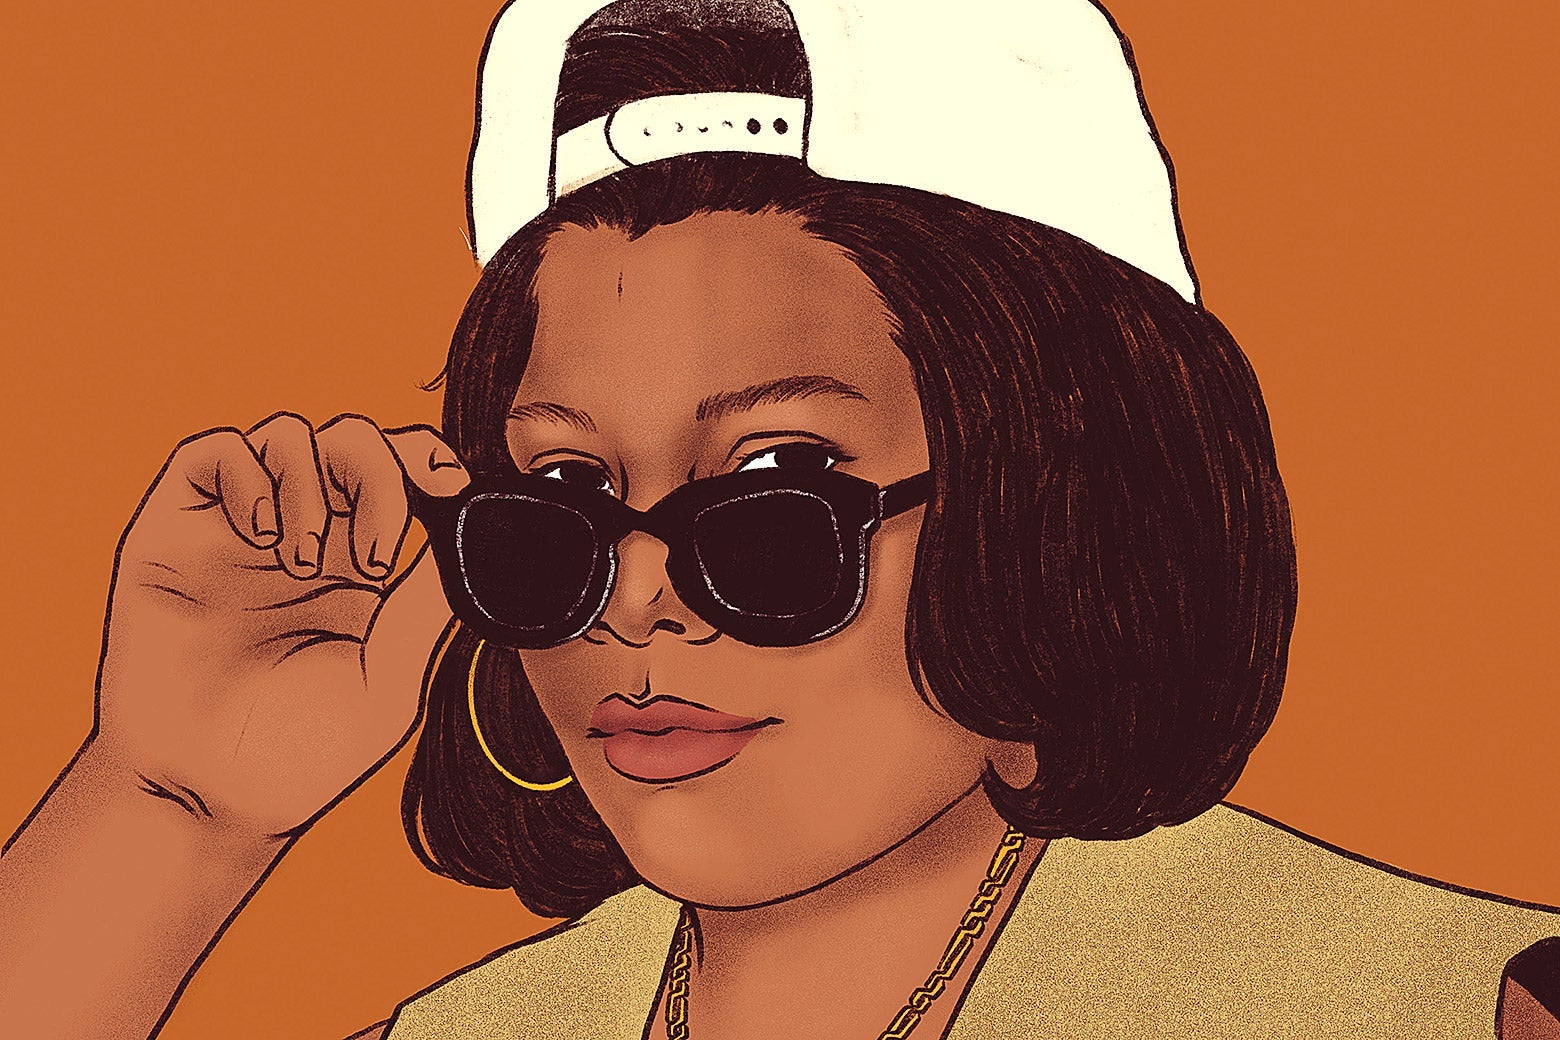 An illustration of Queen Latifah circa 1990s with a backwards cap and sunglasses.